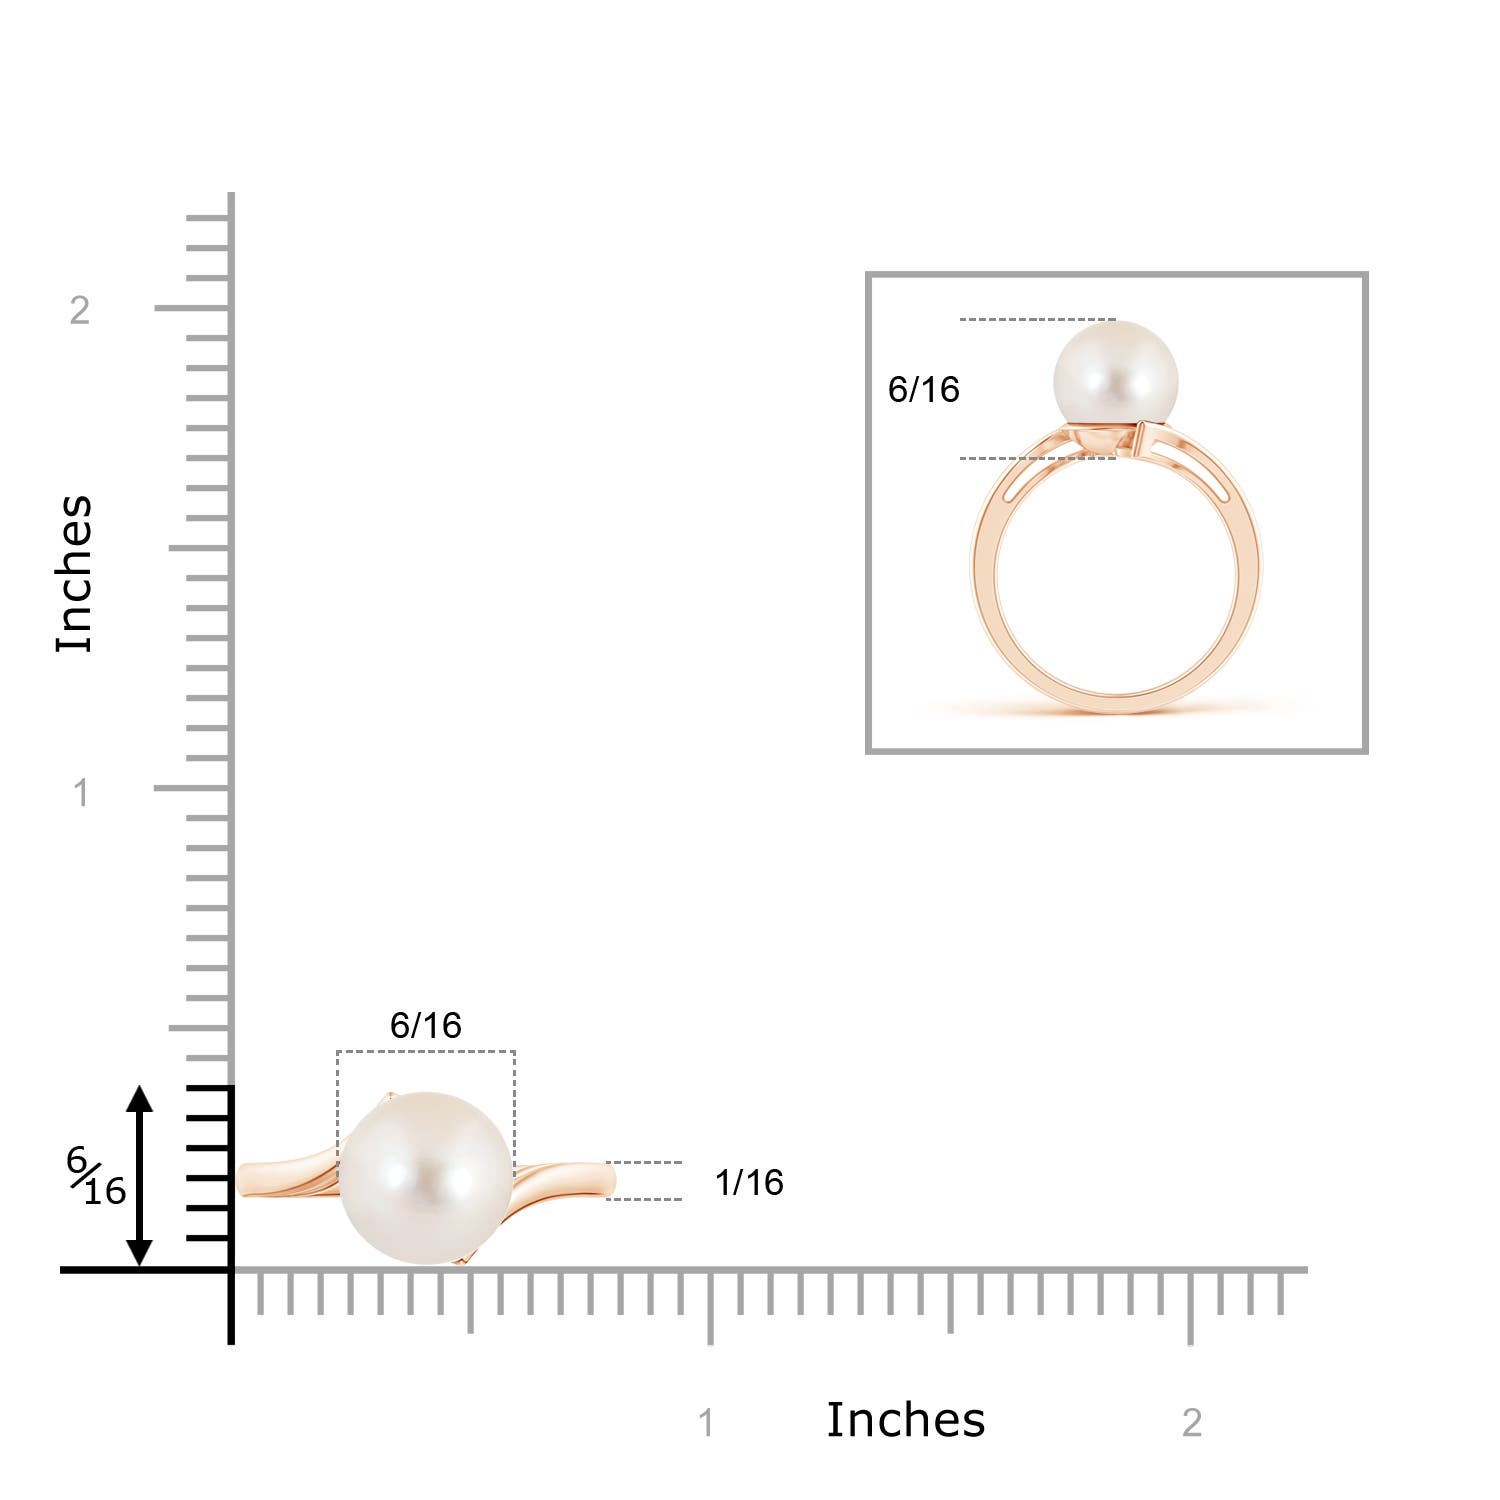 AAAA / 5.25 CT / 14 KT Rose Gold